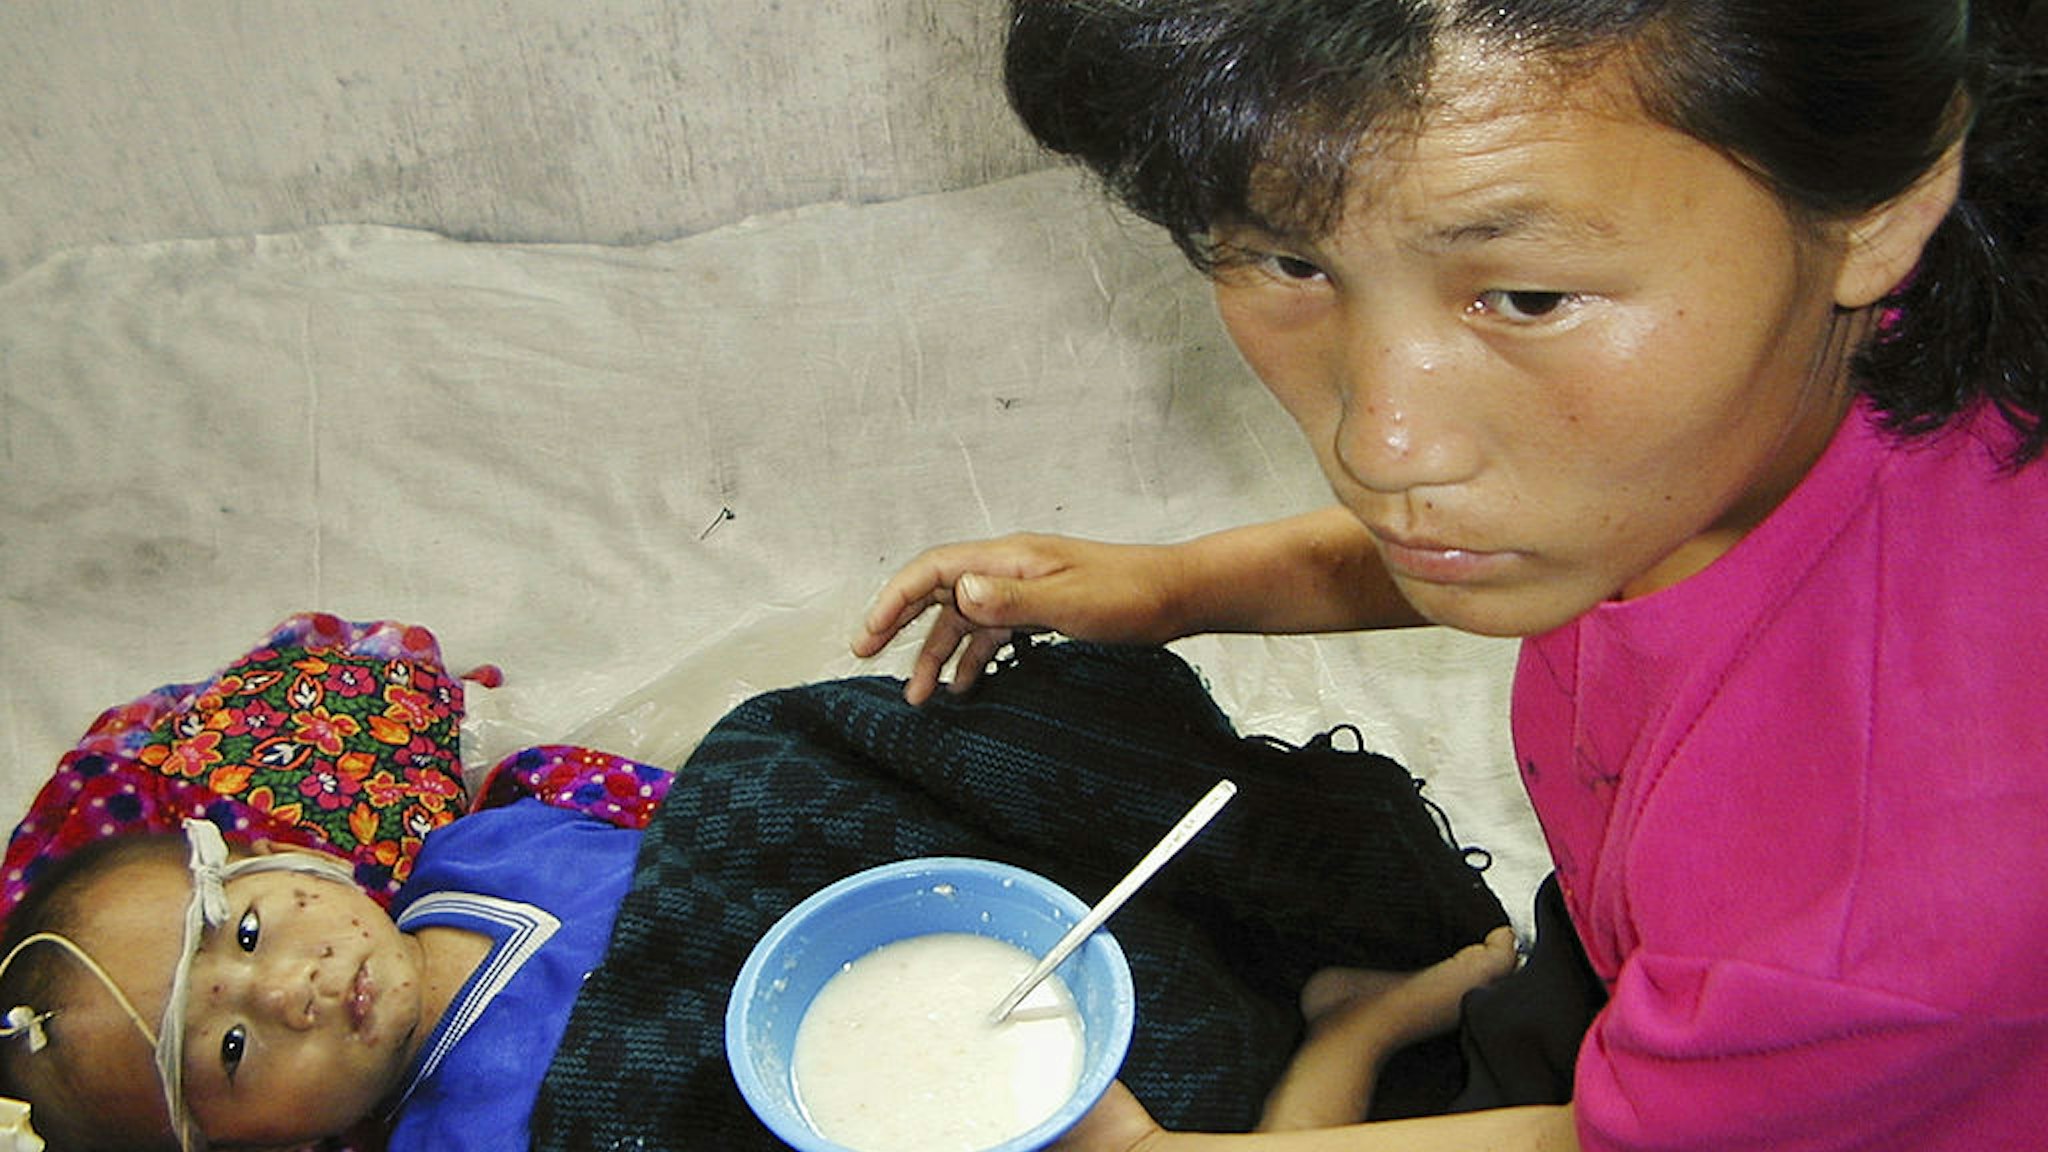 PYONGYANG, NORTH KOREA - AUGUST 4: In this handout from the World Food Programme, a malnourished North Korean boy, 3 year-old Jong Song Chol, is fed a vitamin and mineral-enriched porridge supplied by the United Nations World Food Programme at a hospital in Sinyang county, on August 4, 2004 in South Pyongyang province, North Korea. The United Nations World Food Programme says that millions of North Koreans are chronically malnourished. (Photo by Gerald Bourke/WFP via Getty Images)